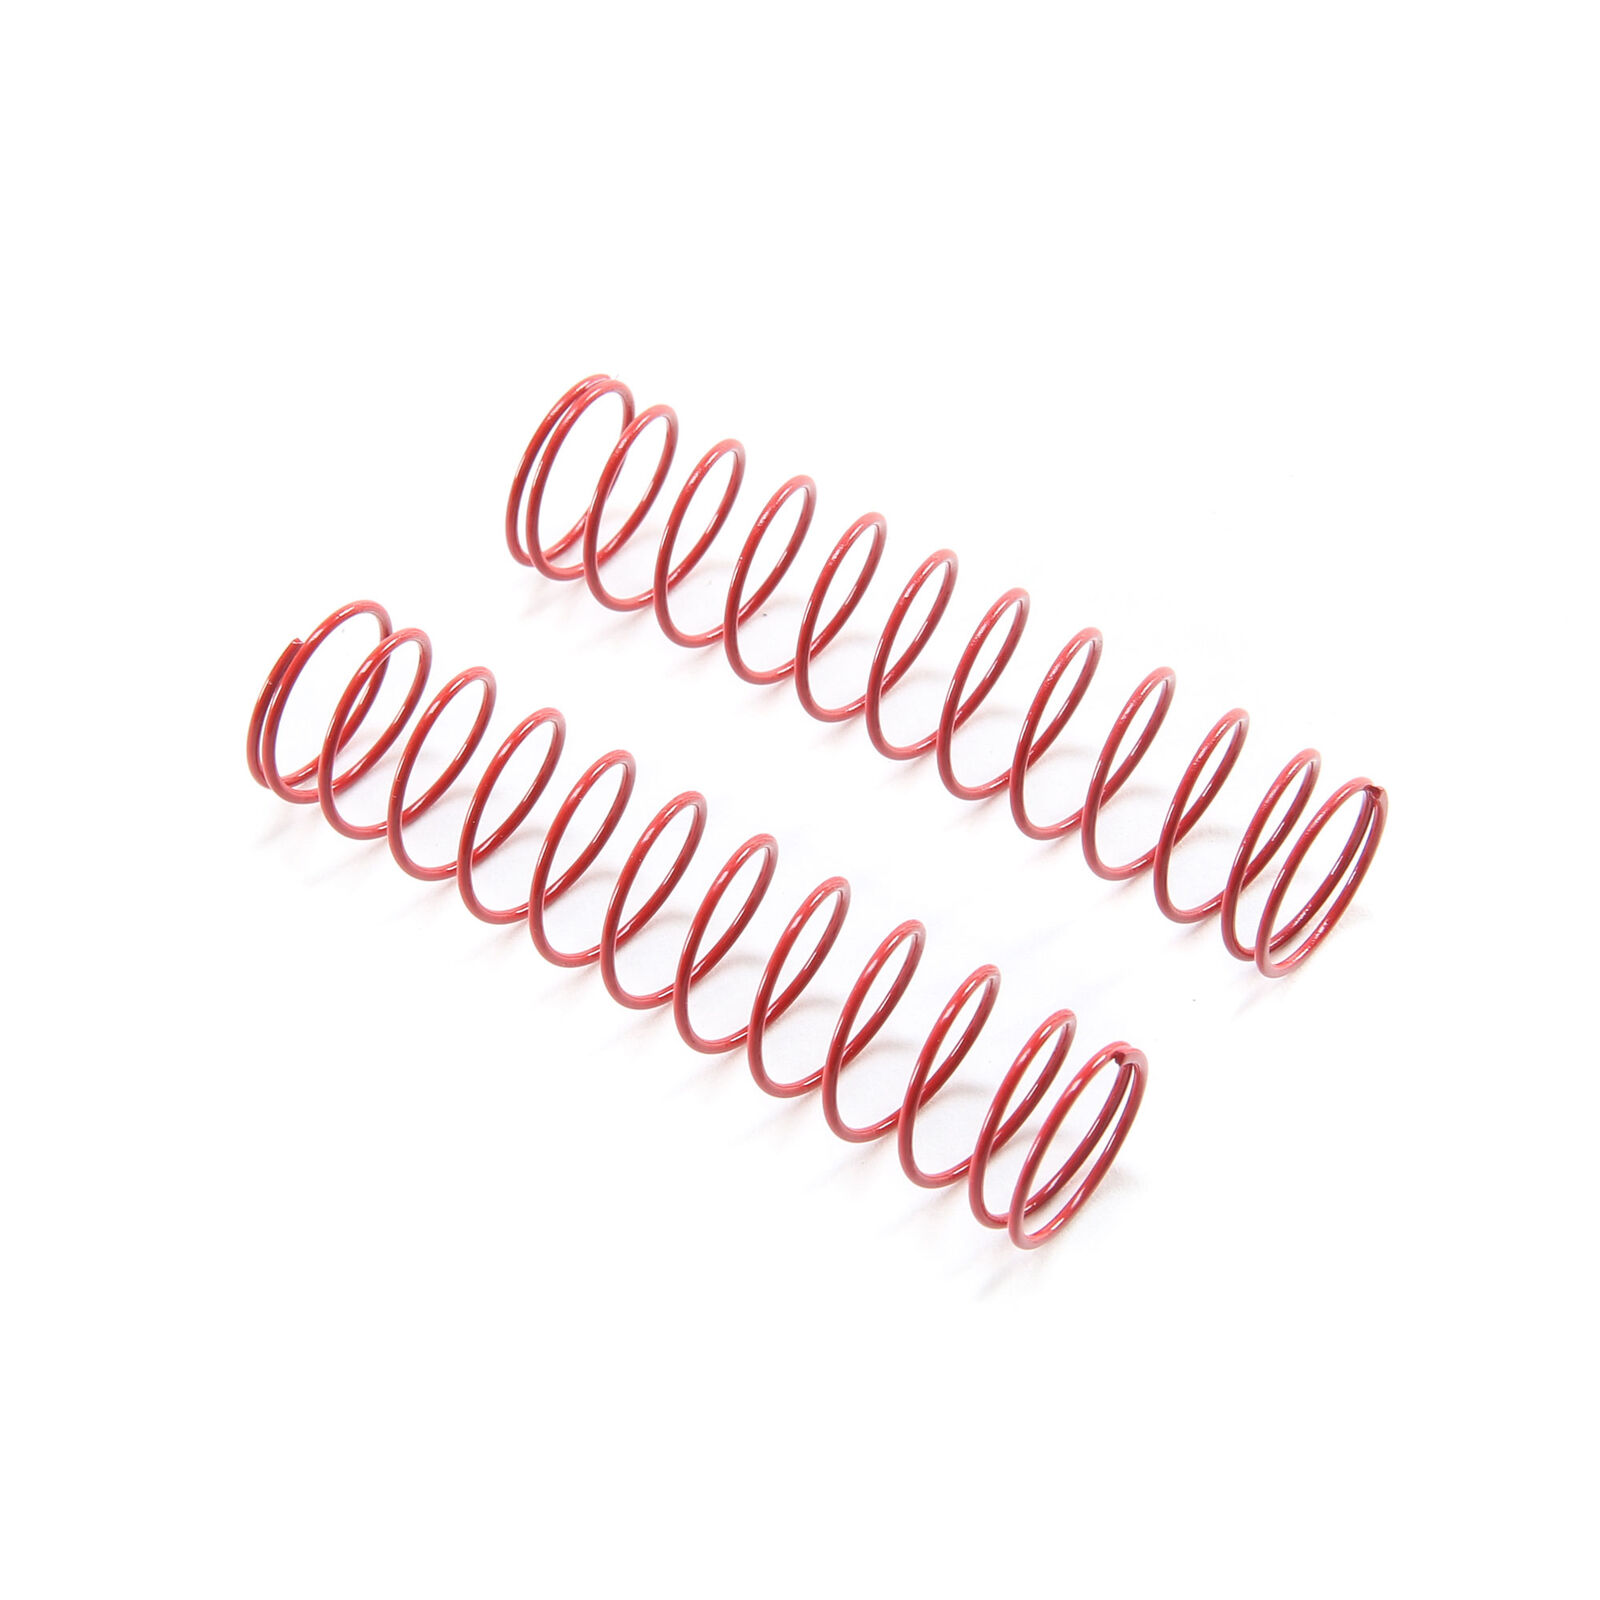 Spring 12.5 x 60mm 1.13lbs White, Red Springs (2)